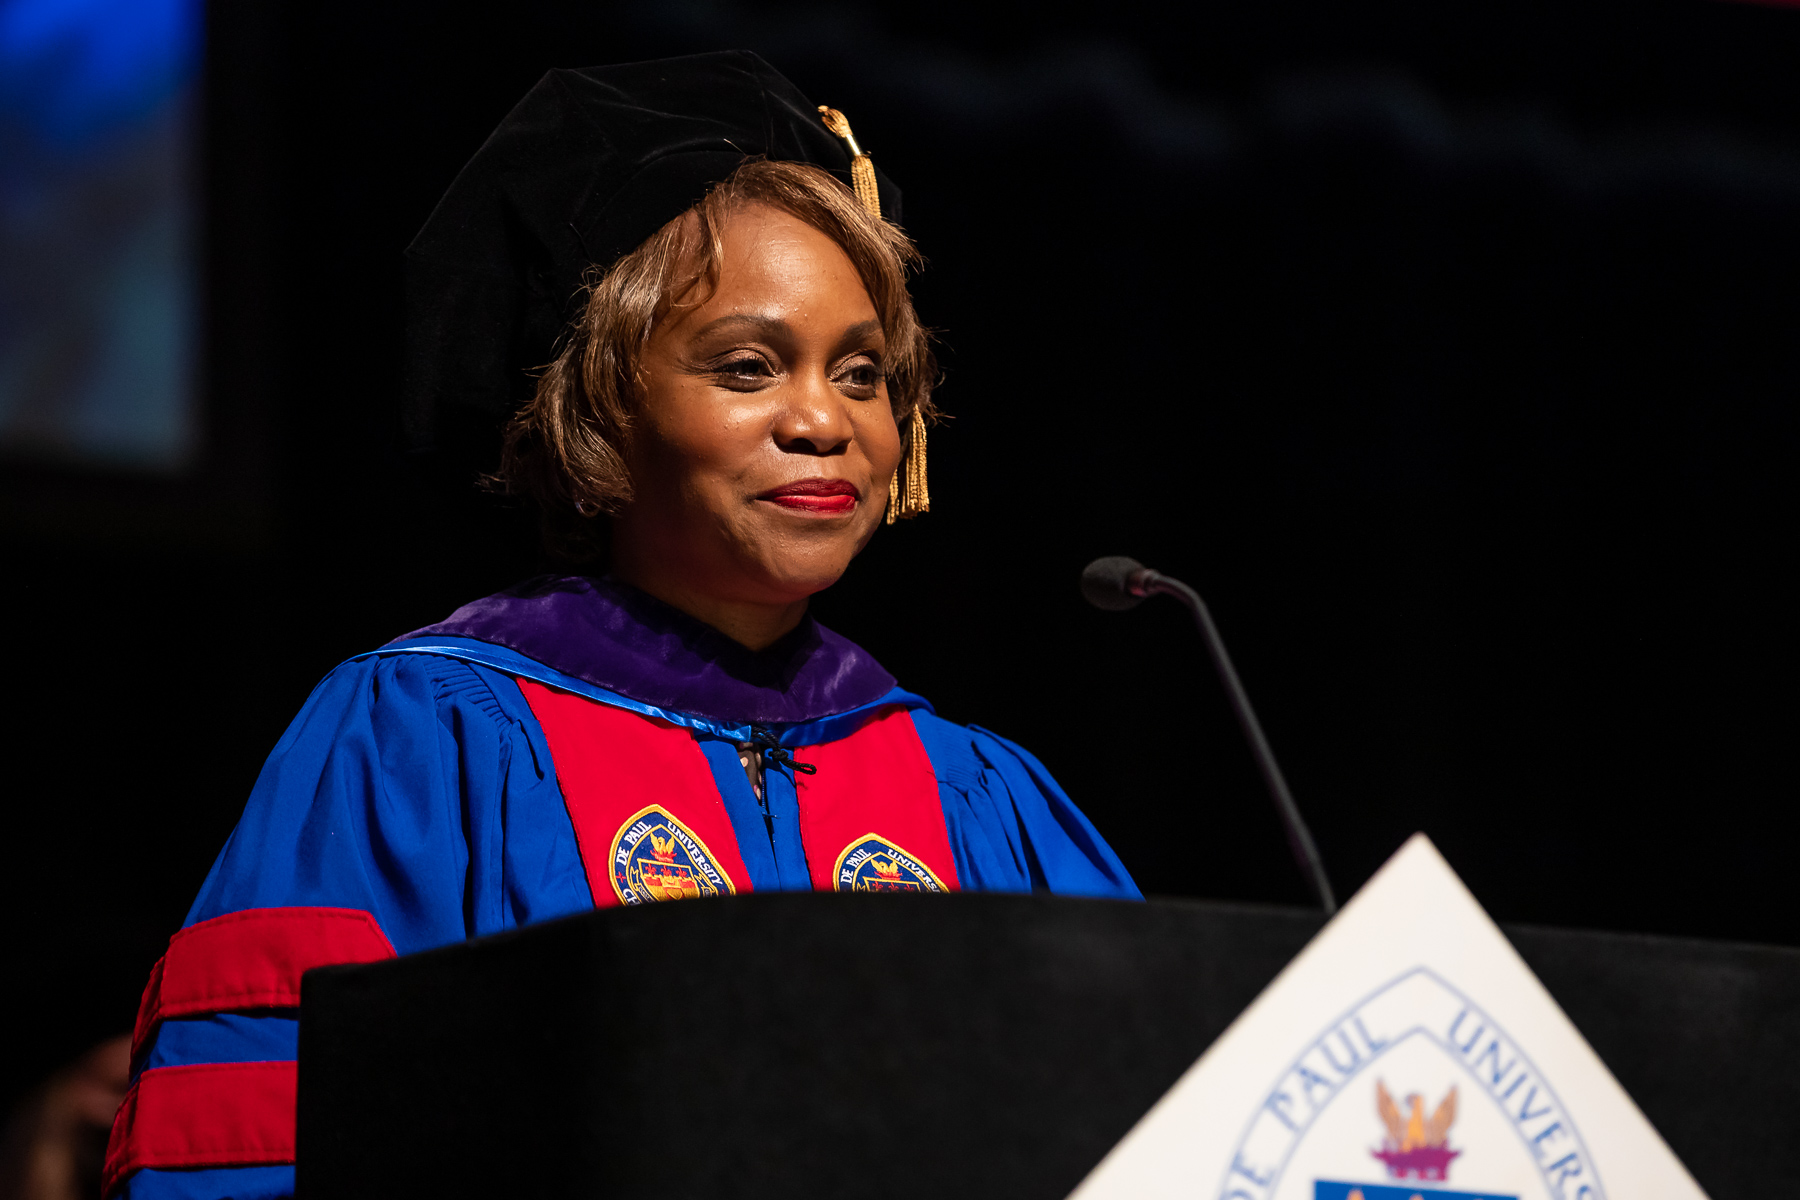 A DePaul Law alumna, Natalye Paquin, gave the commencement address.